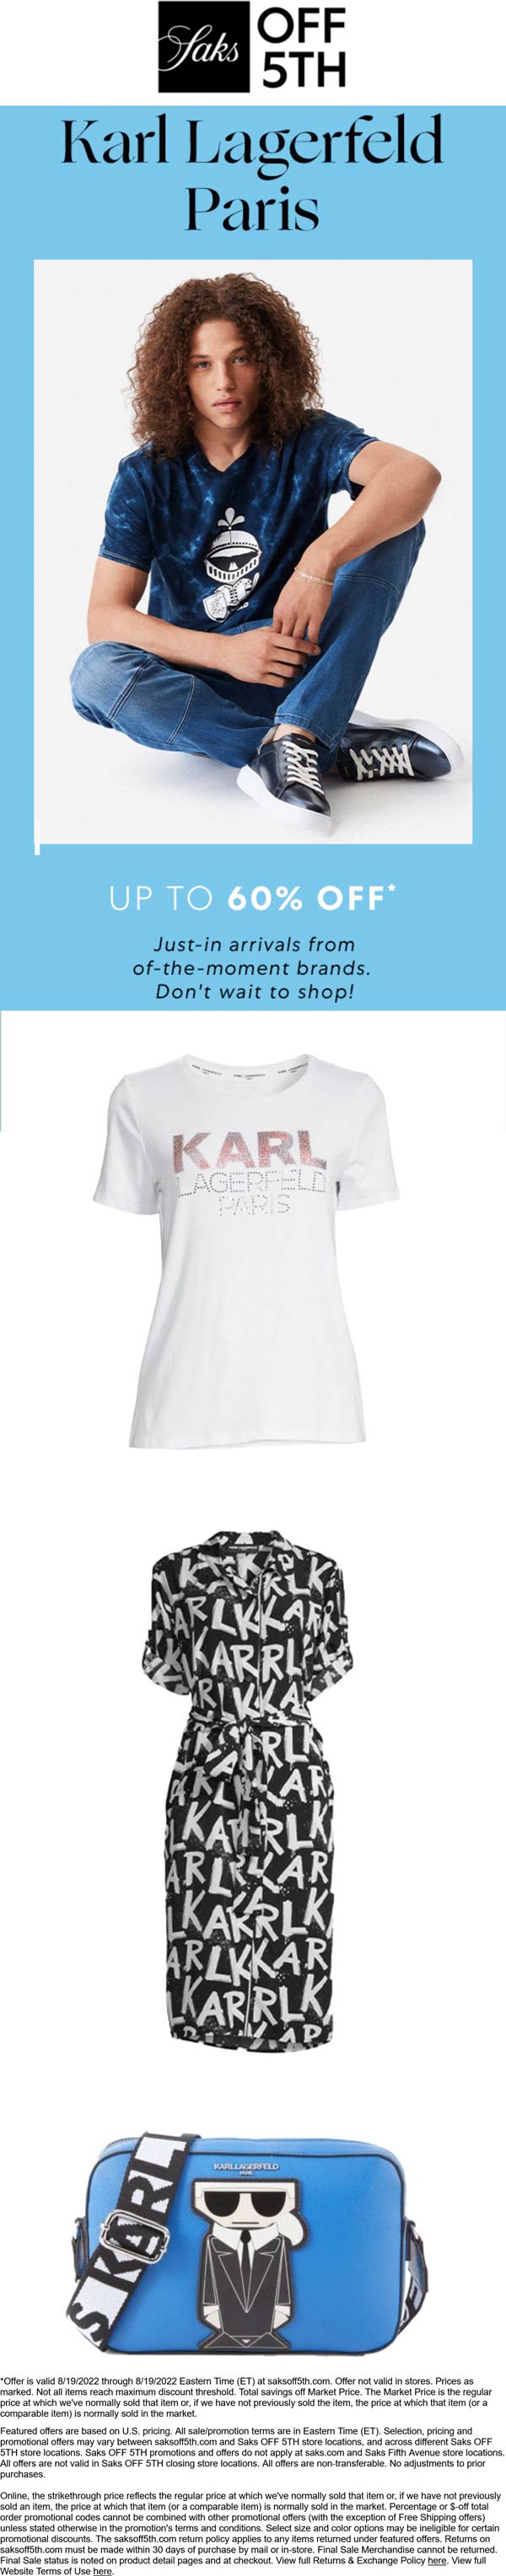 Saks OFF 5TH stores Coupon  60% off various Karl Lagerfeld going on today online at Saks OFF 5TH #saksoff5th 